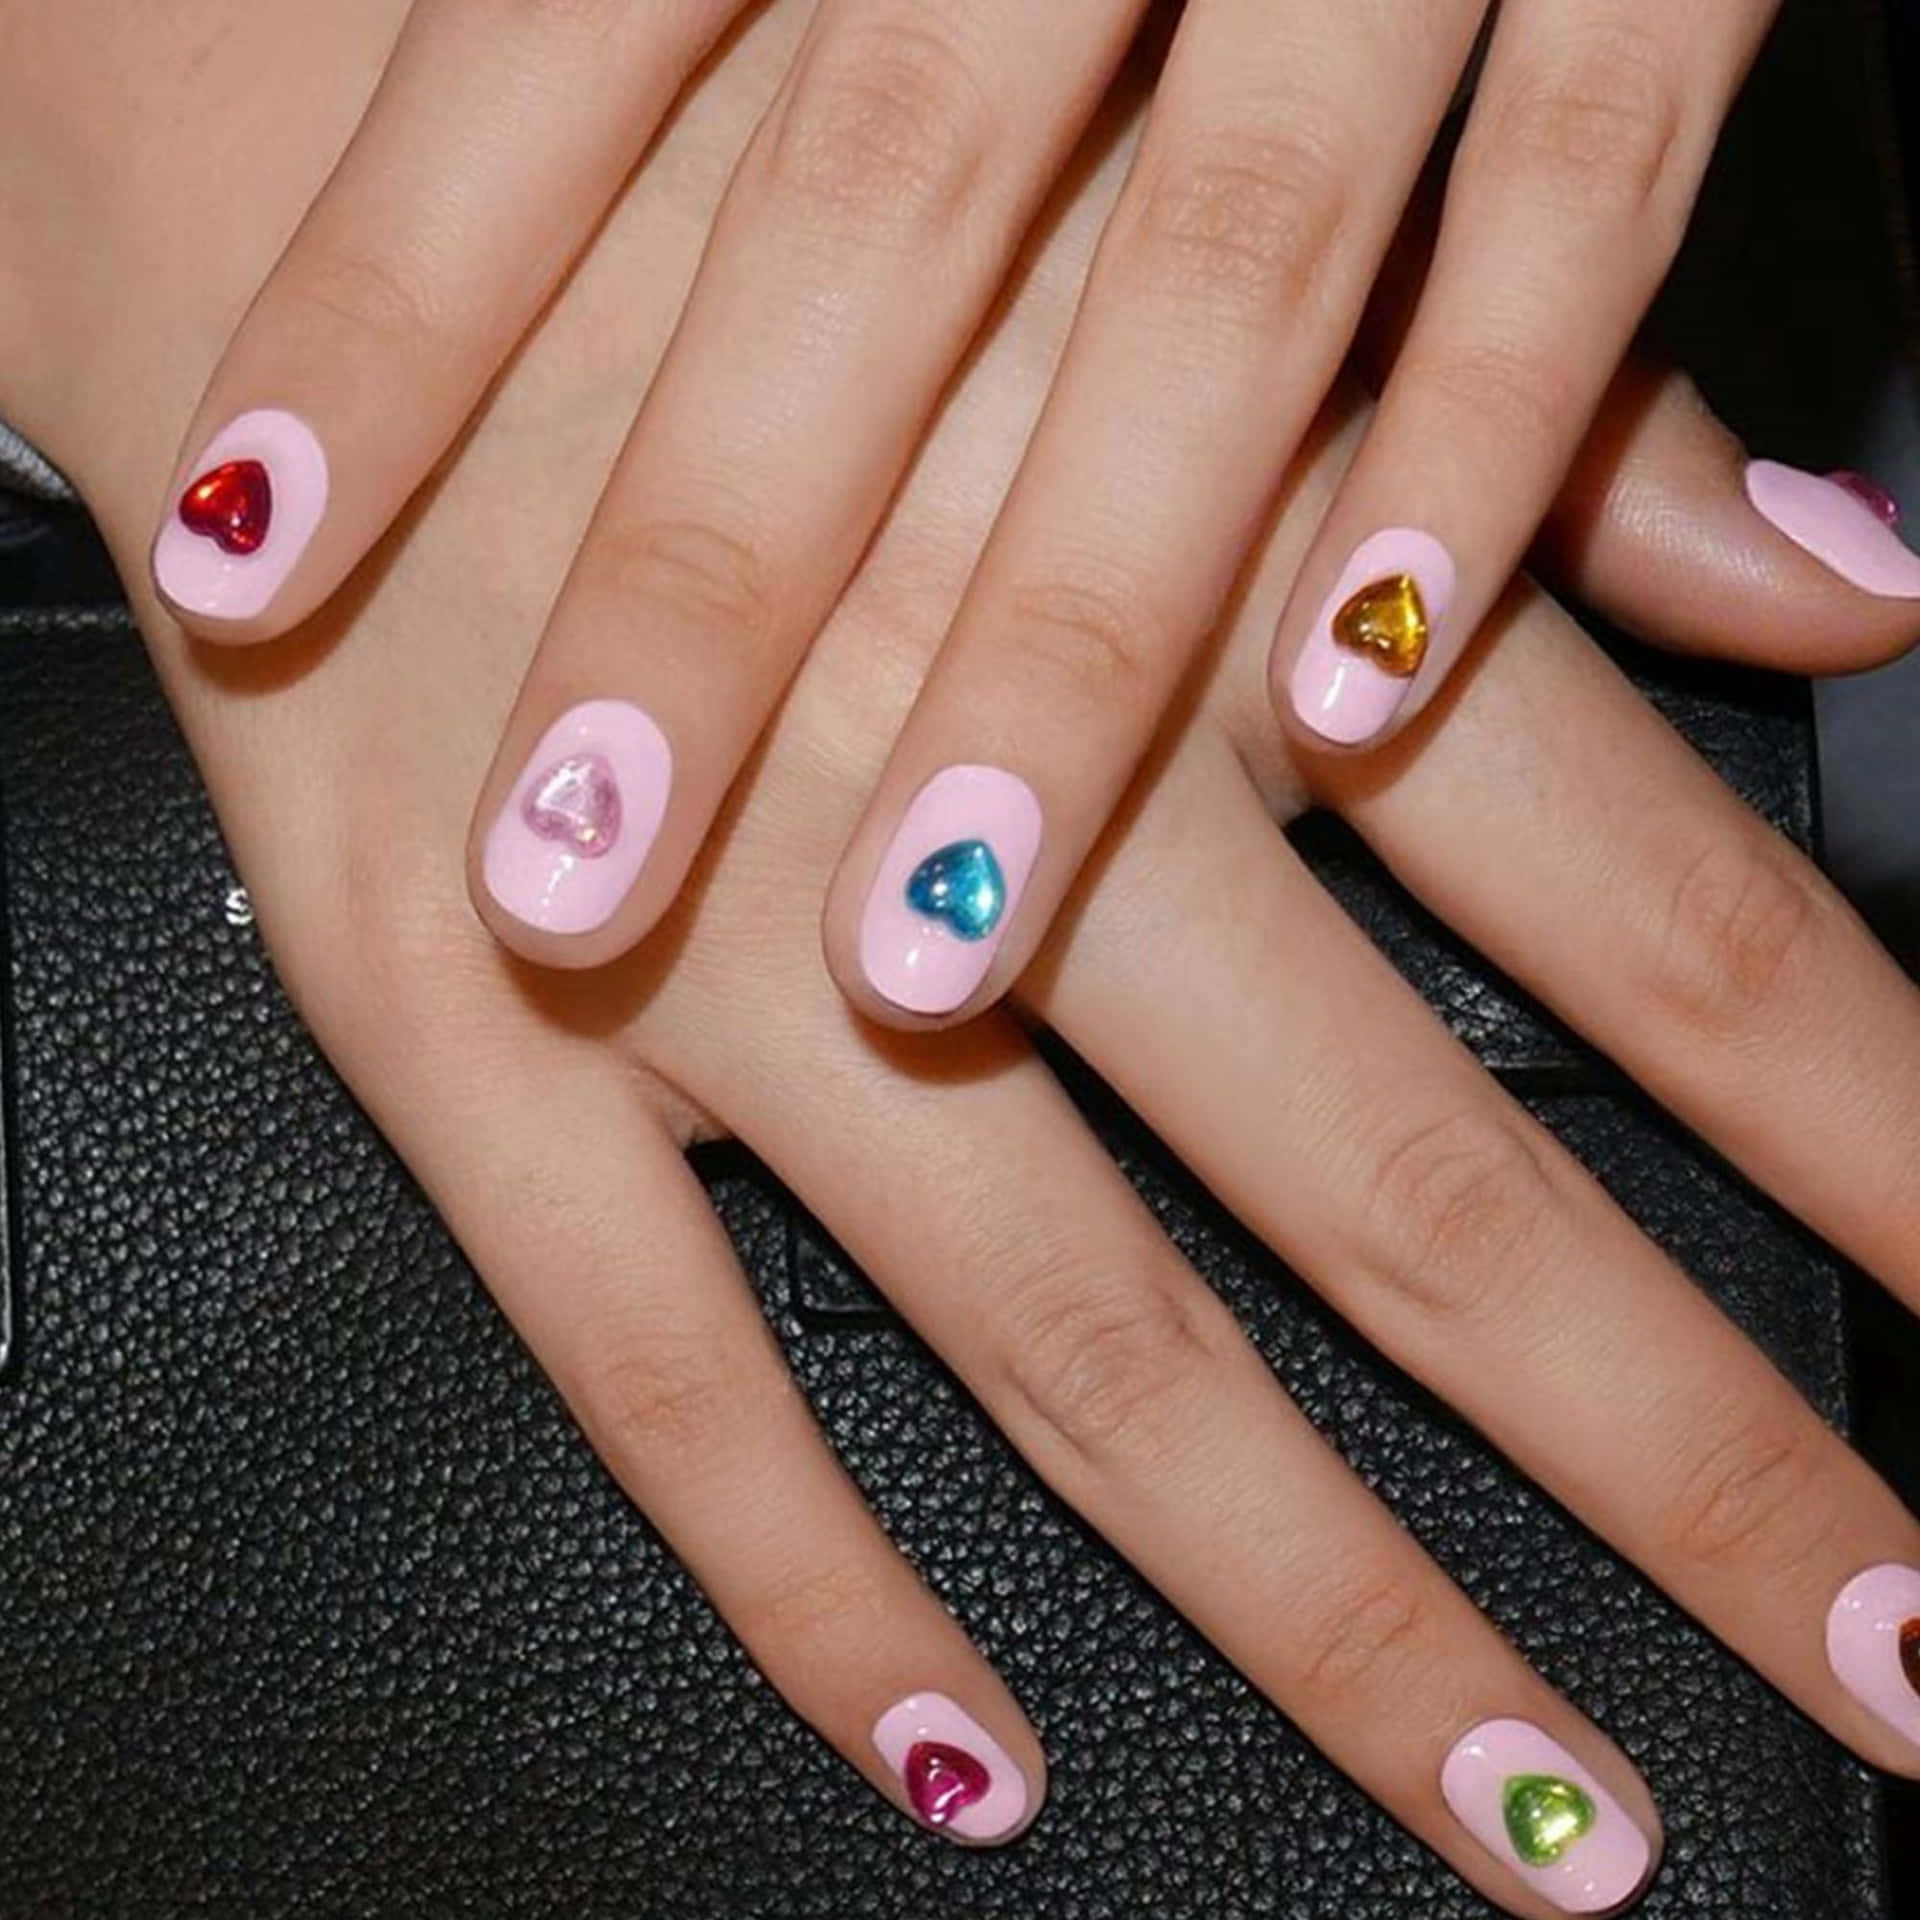 Caption: Vibrant Spring Nails with Floral Design Wallpaper